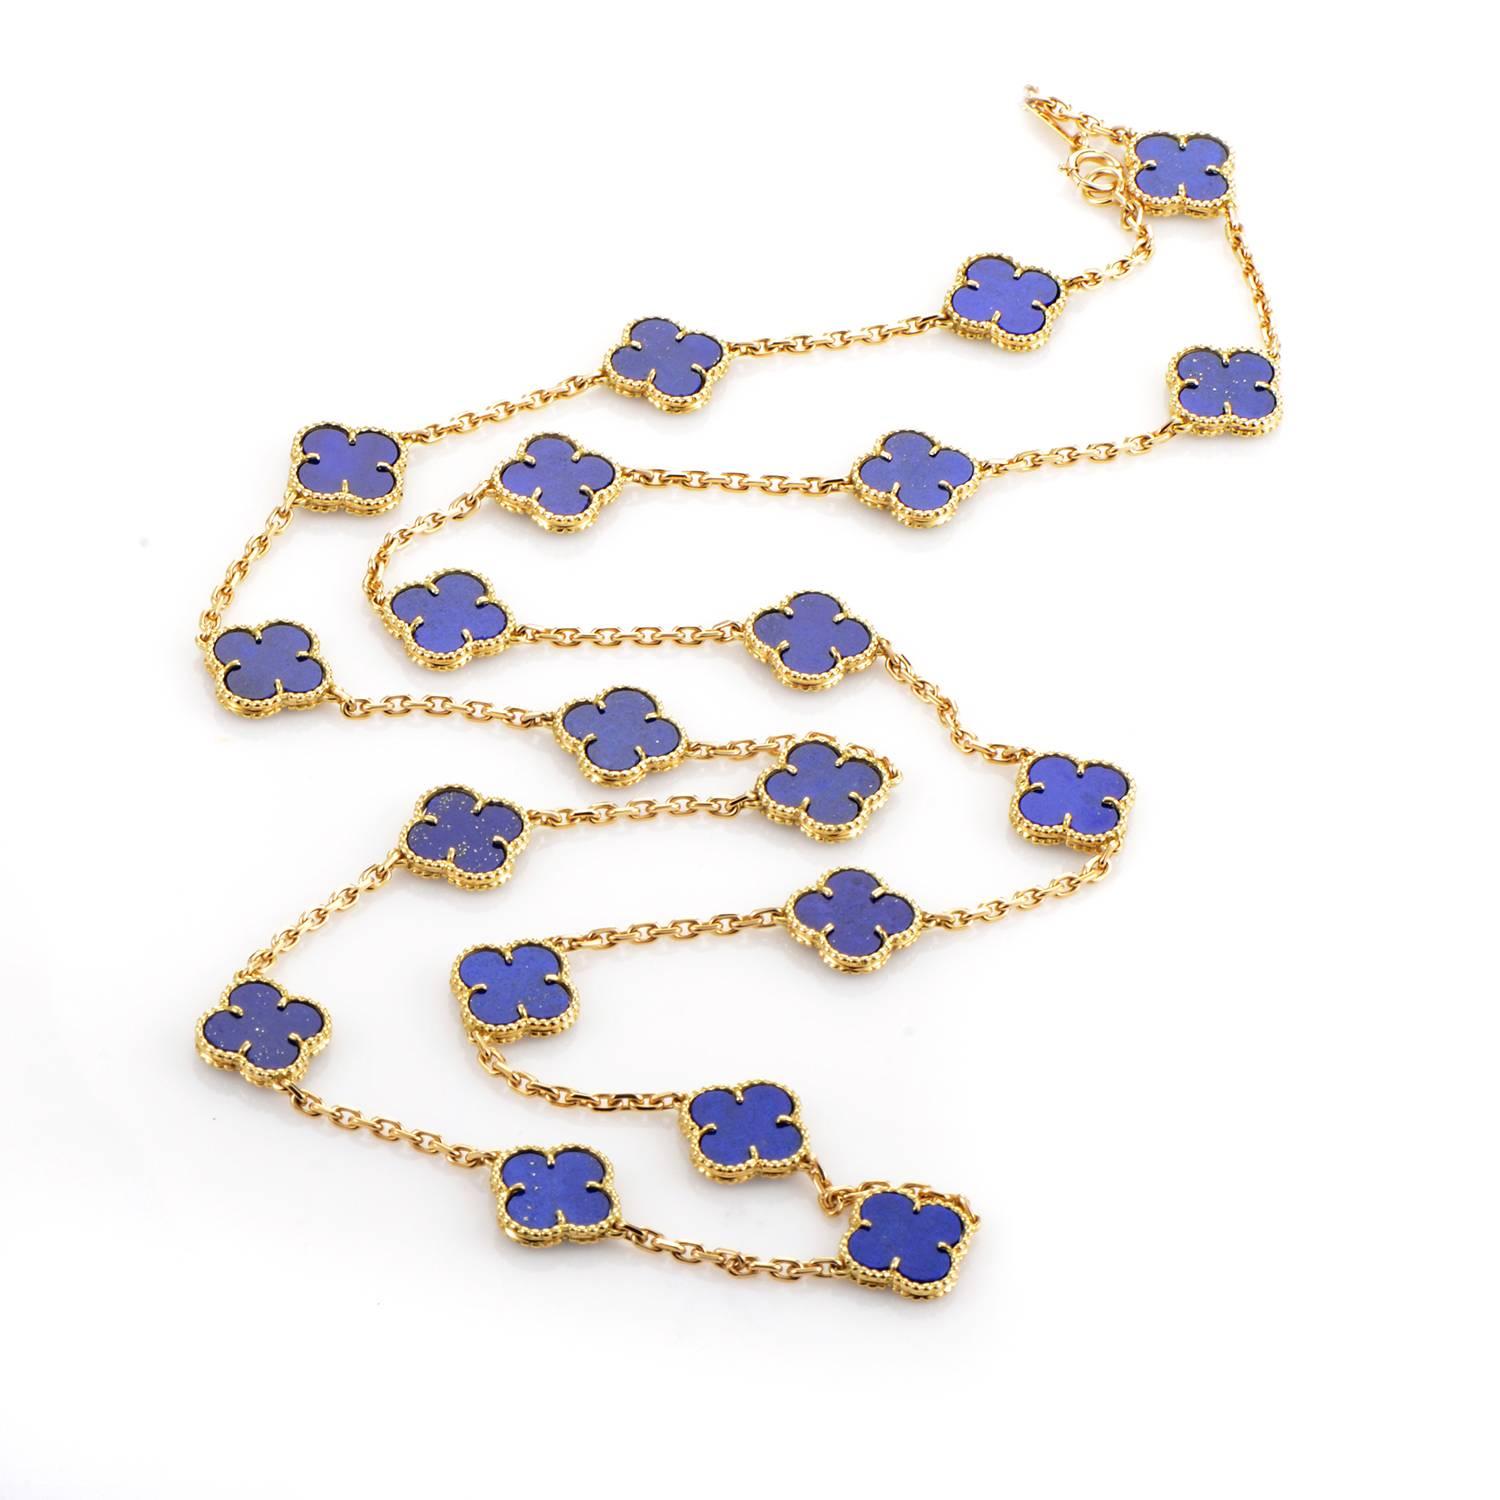 A neatly arranged composition of engaging lapis stones is lined along the subtle 18K yellow gold chain of this enchanting necklace from Van Cleef & Arpels.
Included Items: Manufacturer's Papers